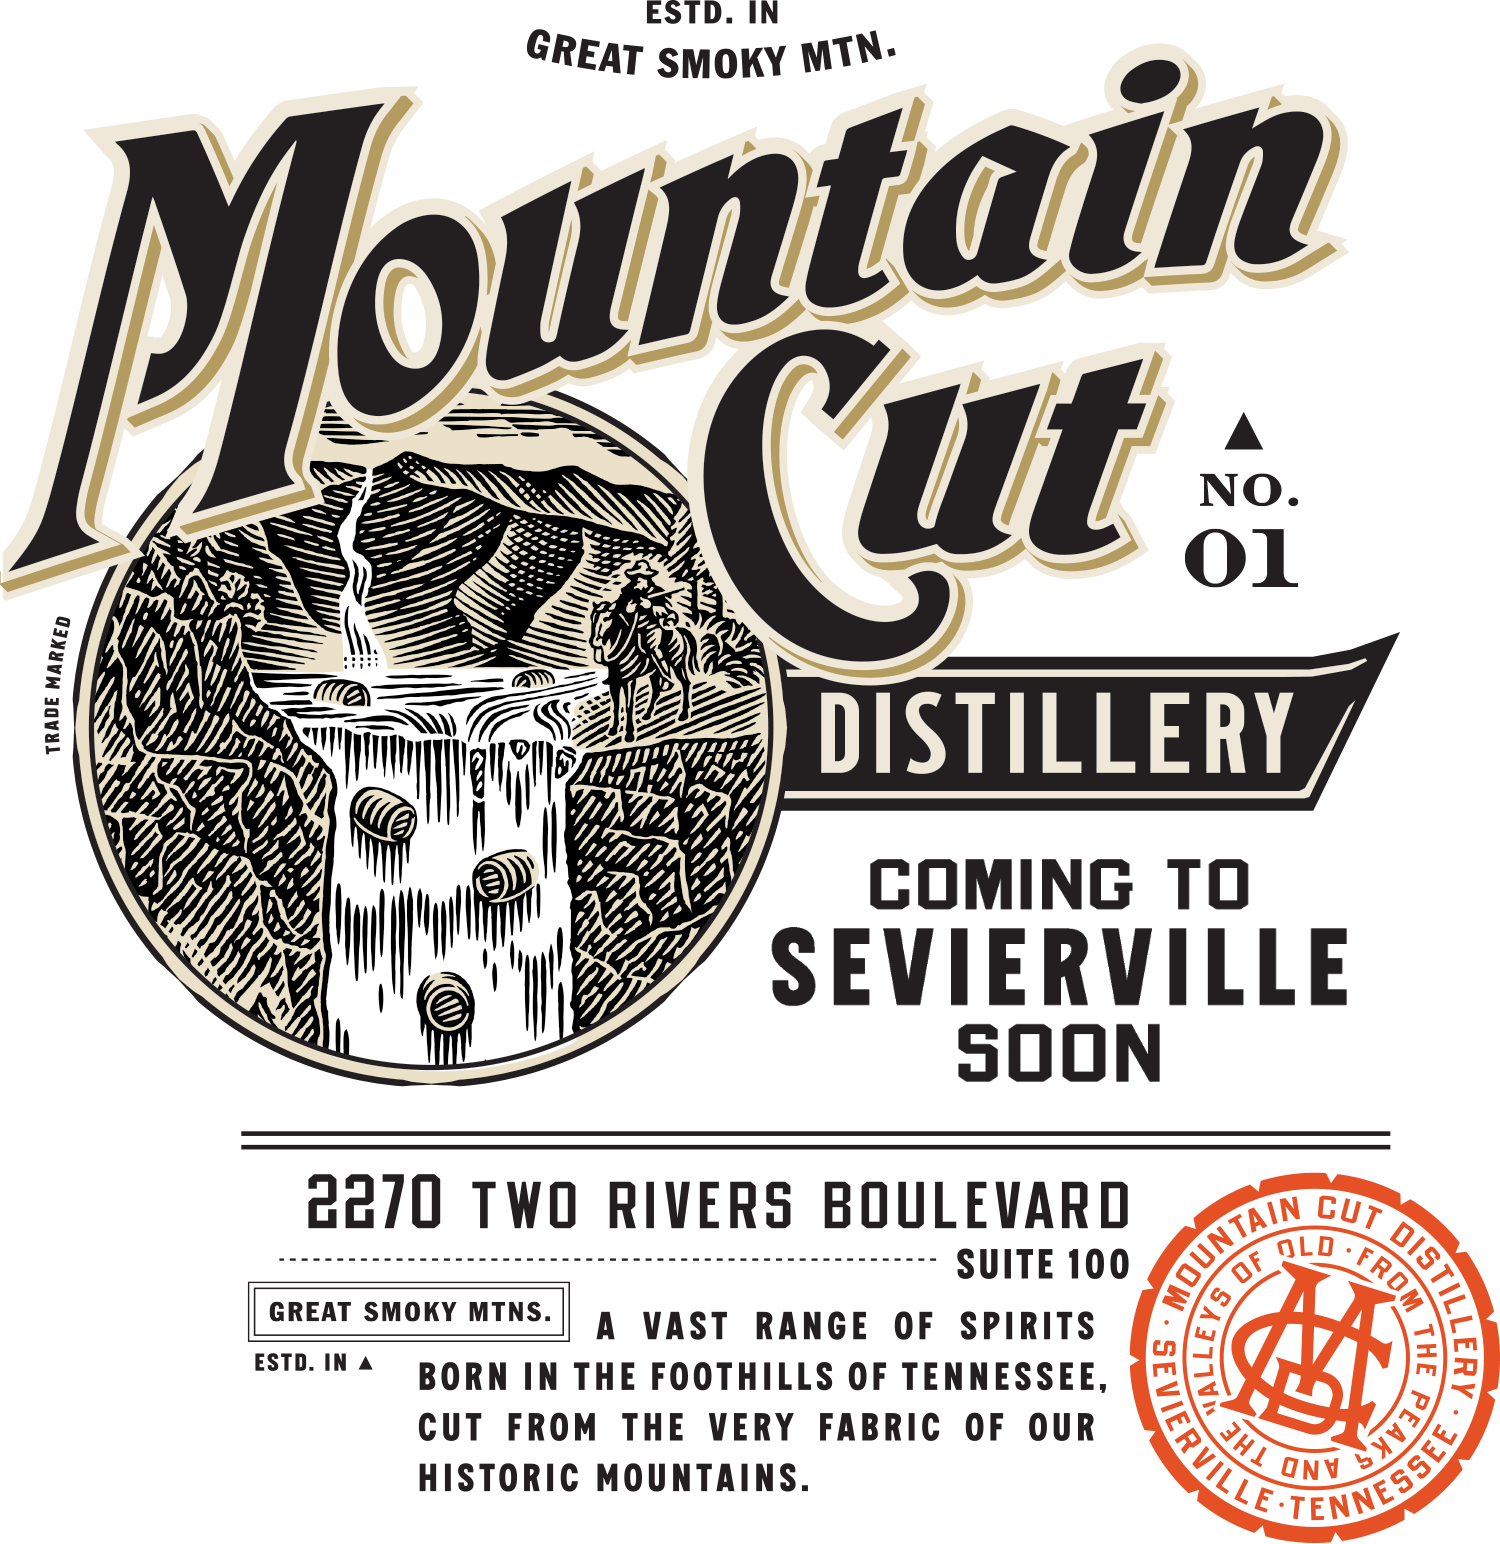 Mountain Cut Distillery, coming to Sevierville Early 2023, 2270 Two Rivers Boulevard, Suite 100, A vast range of spirits born in the foothills of Tennessee, cut from the very fabric of our historic mountains.